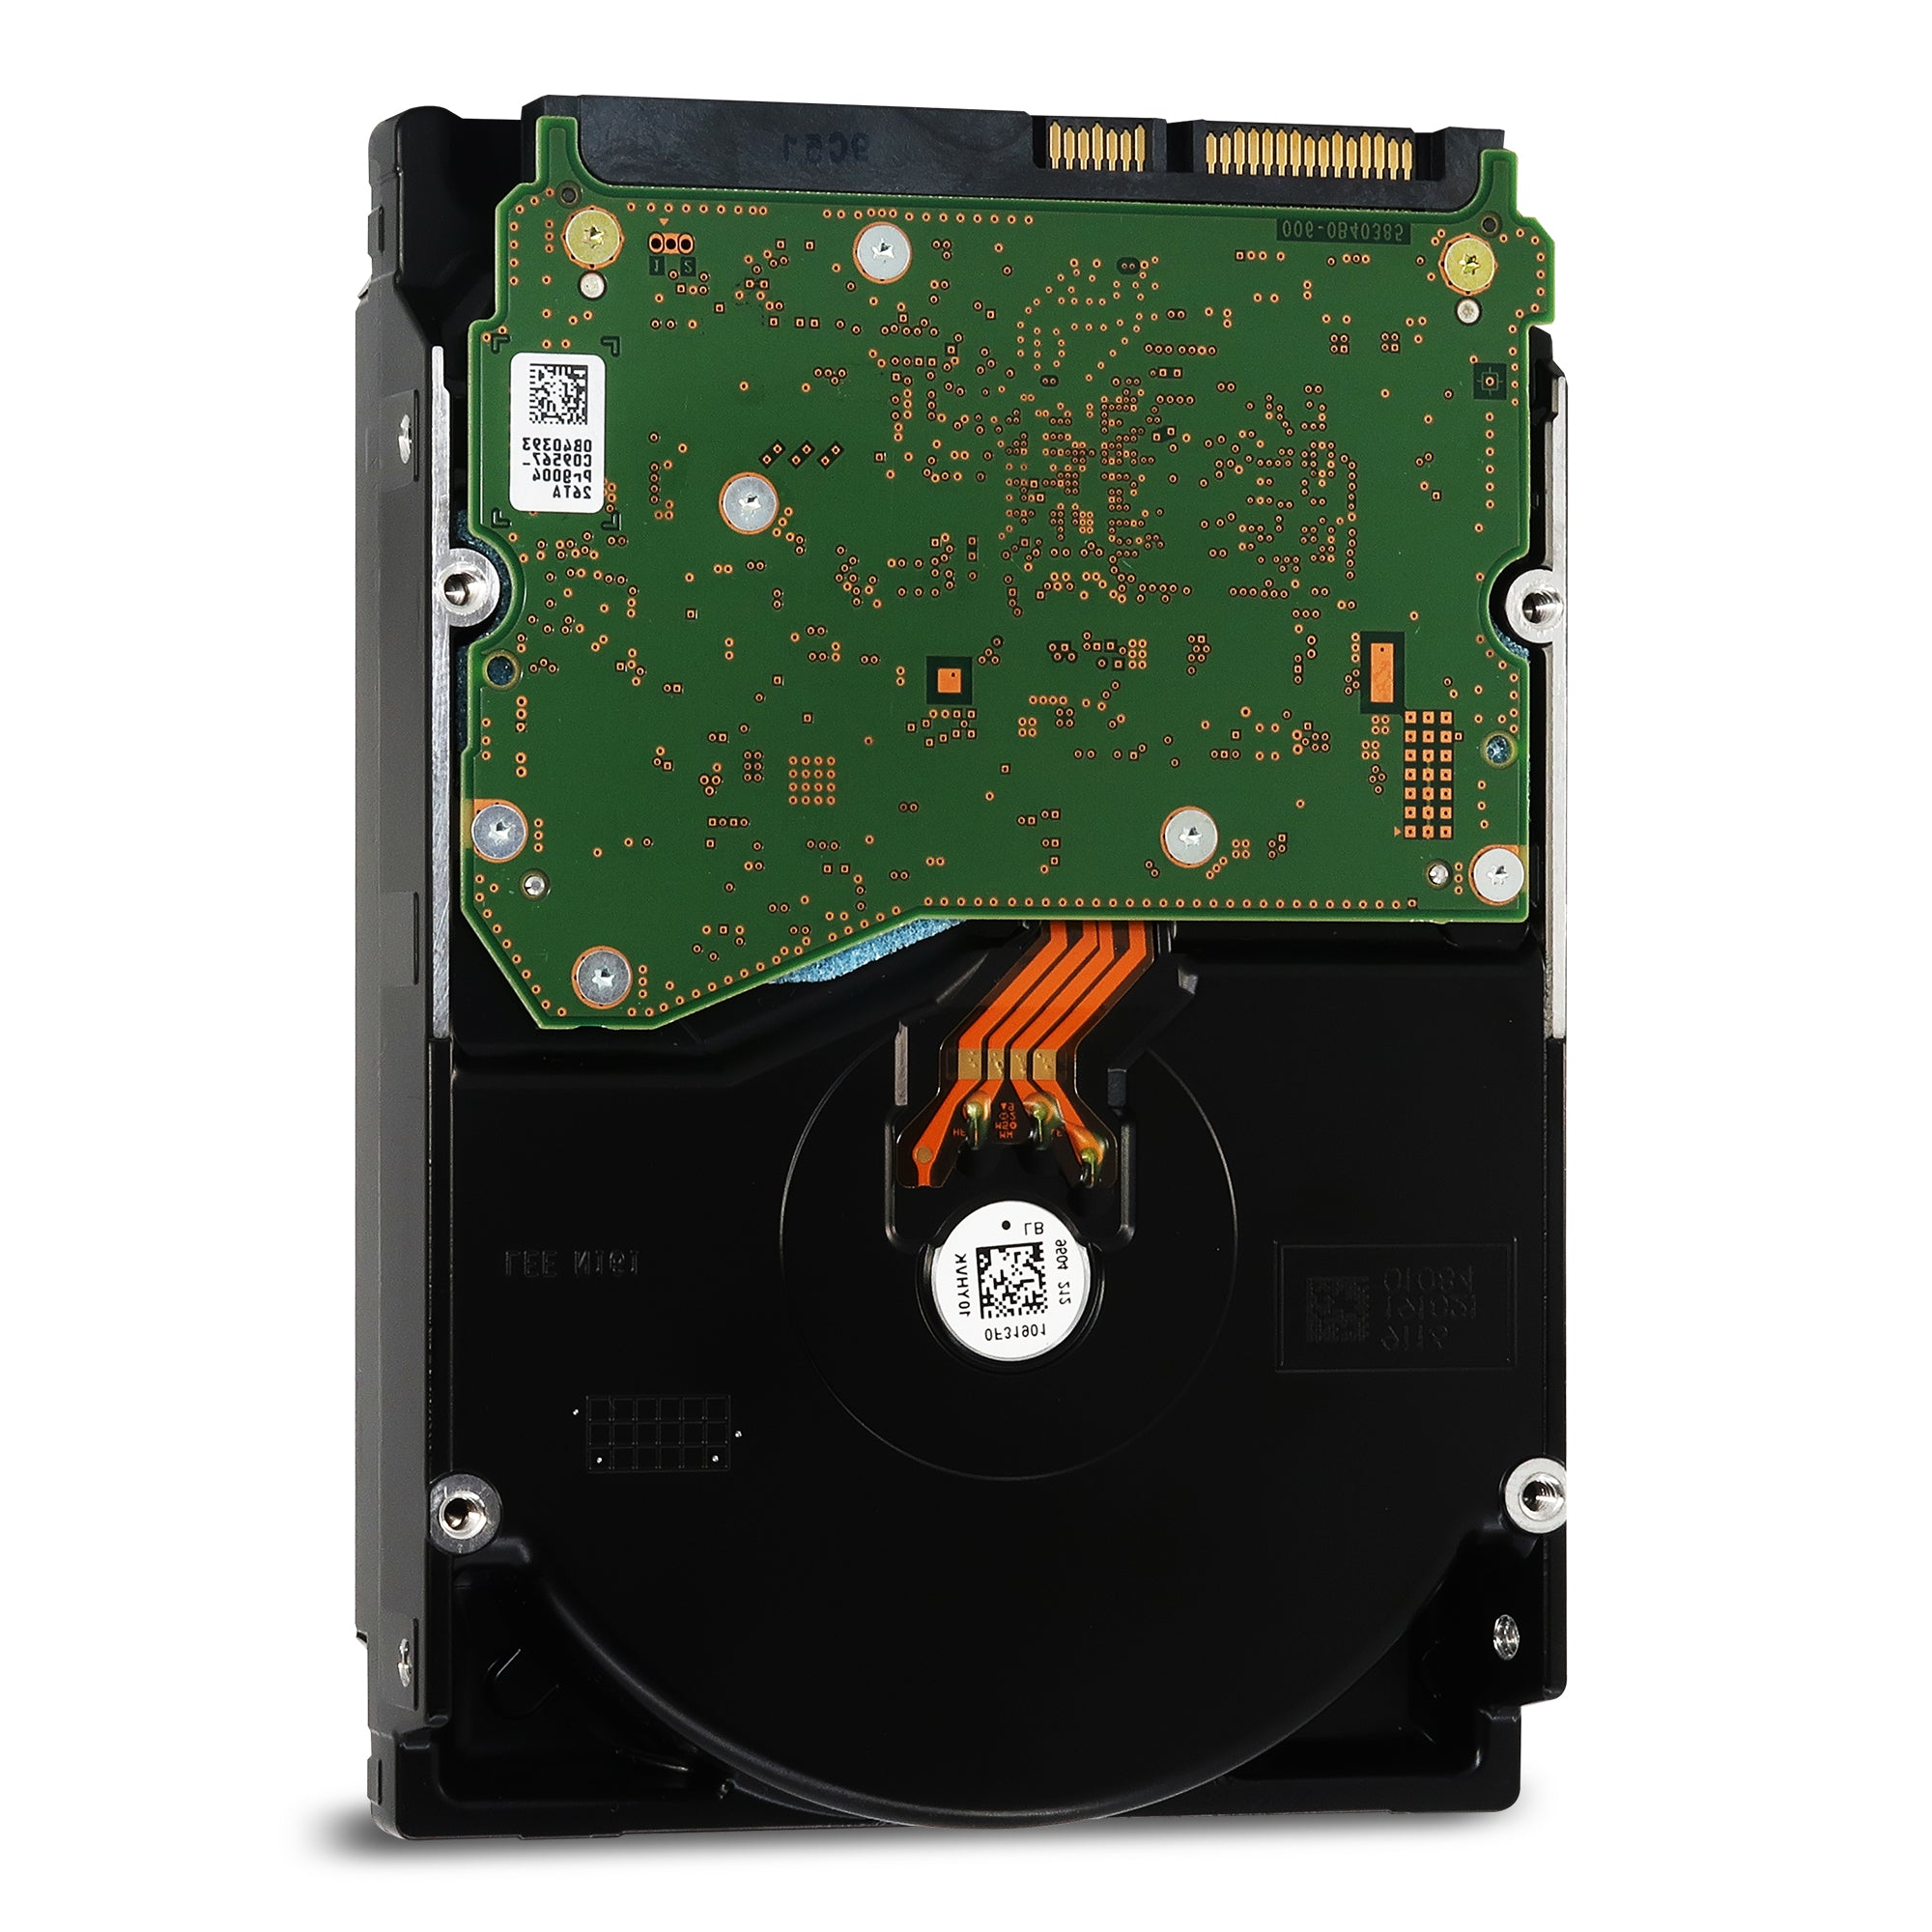 Western Digital DC HC510 HUH721010ALN600 0F27502 10TB 7.2K RPM SATA 6Gb/s 4Kn 256MB 3.5" ISE Power Disable Pin Manufacturer Recertified HDD - Rear View